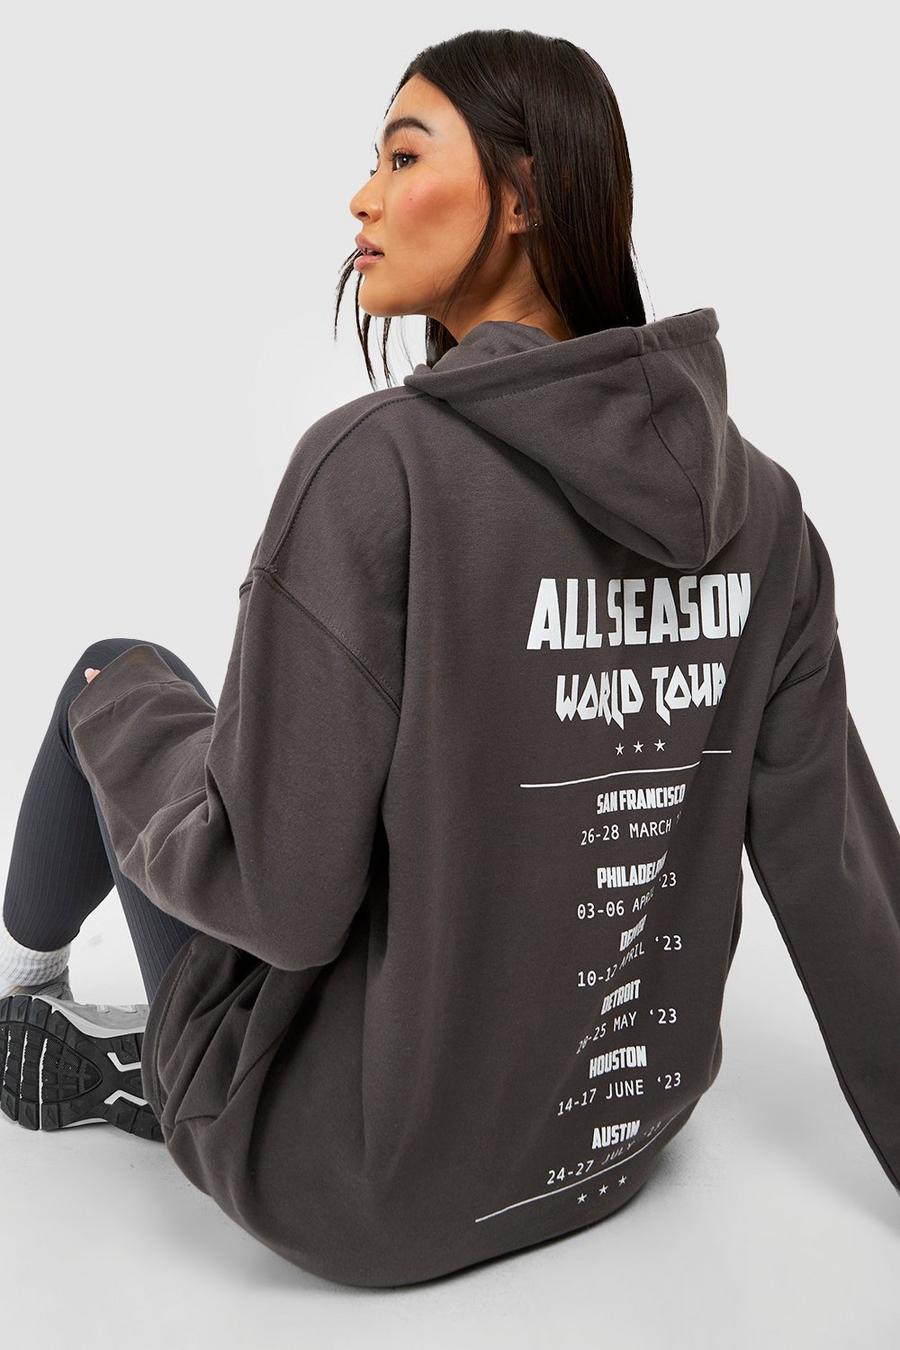 Road Tour Oversized Graphic Hoodie